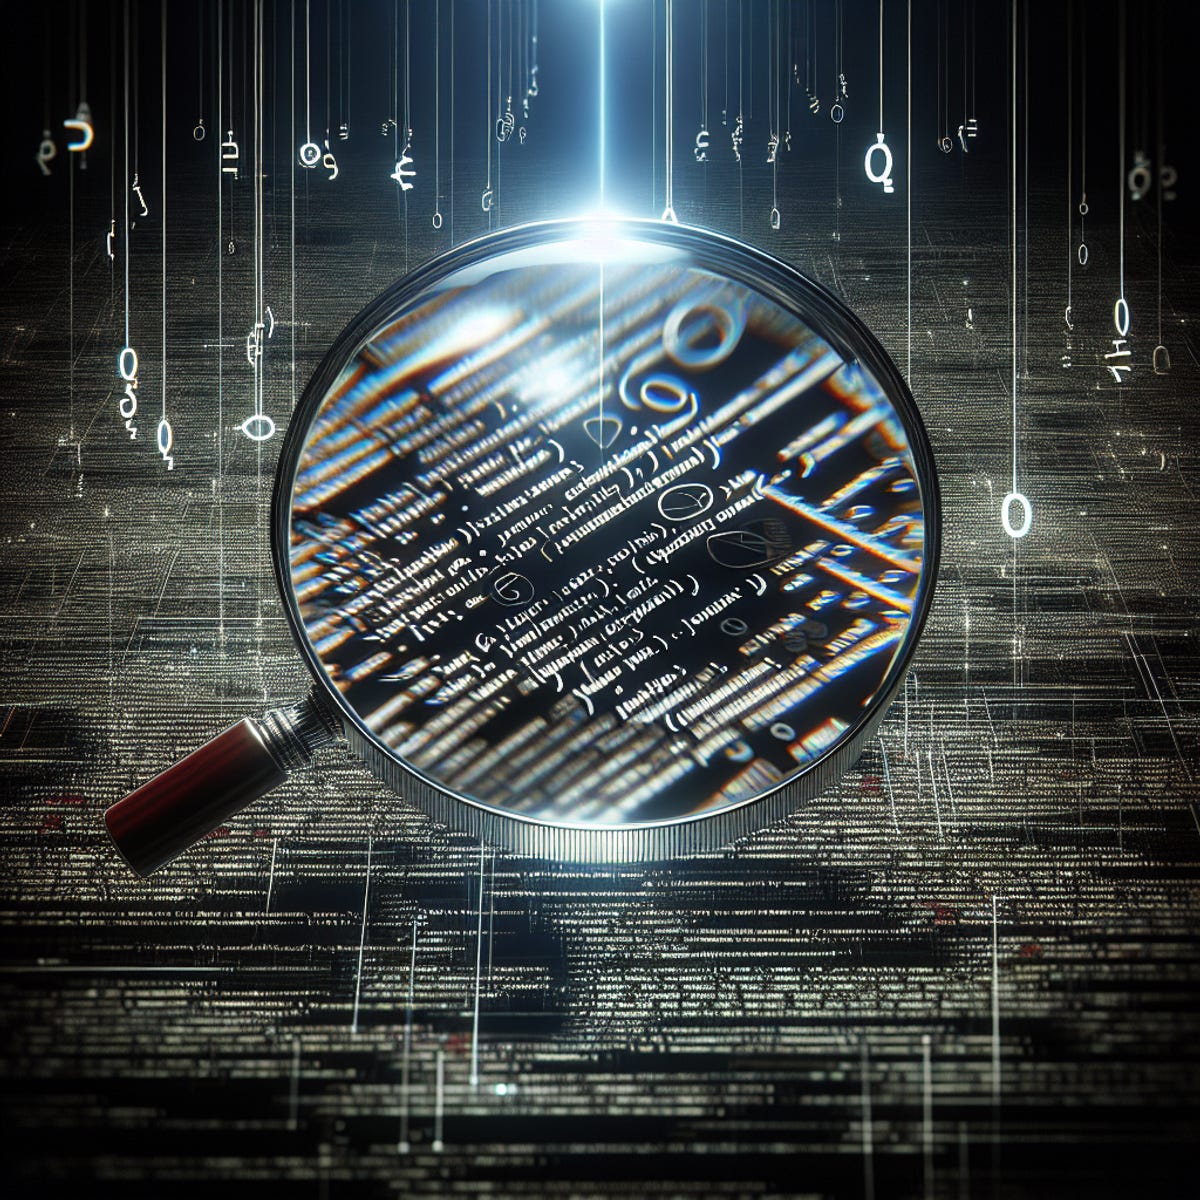 A magnifying glass hovers in the air, reflecting abstract patterns of computer code symbols.